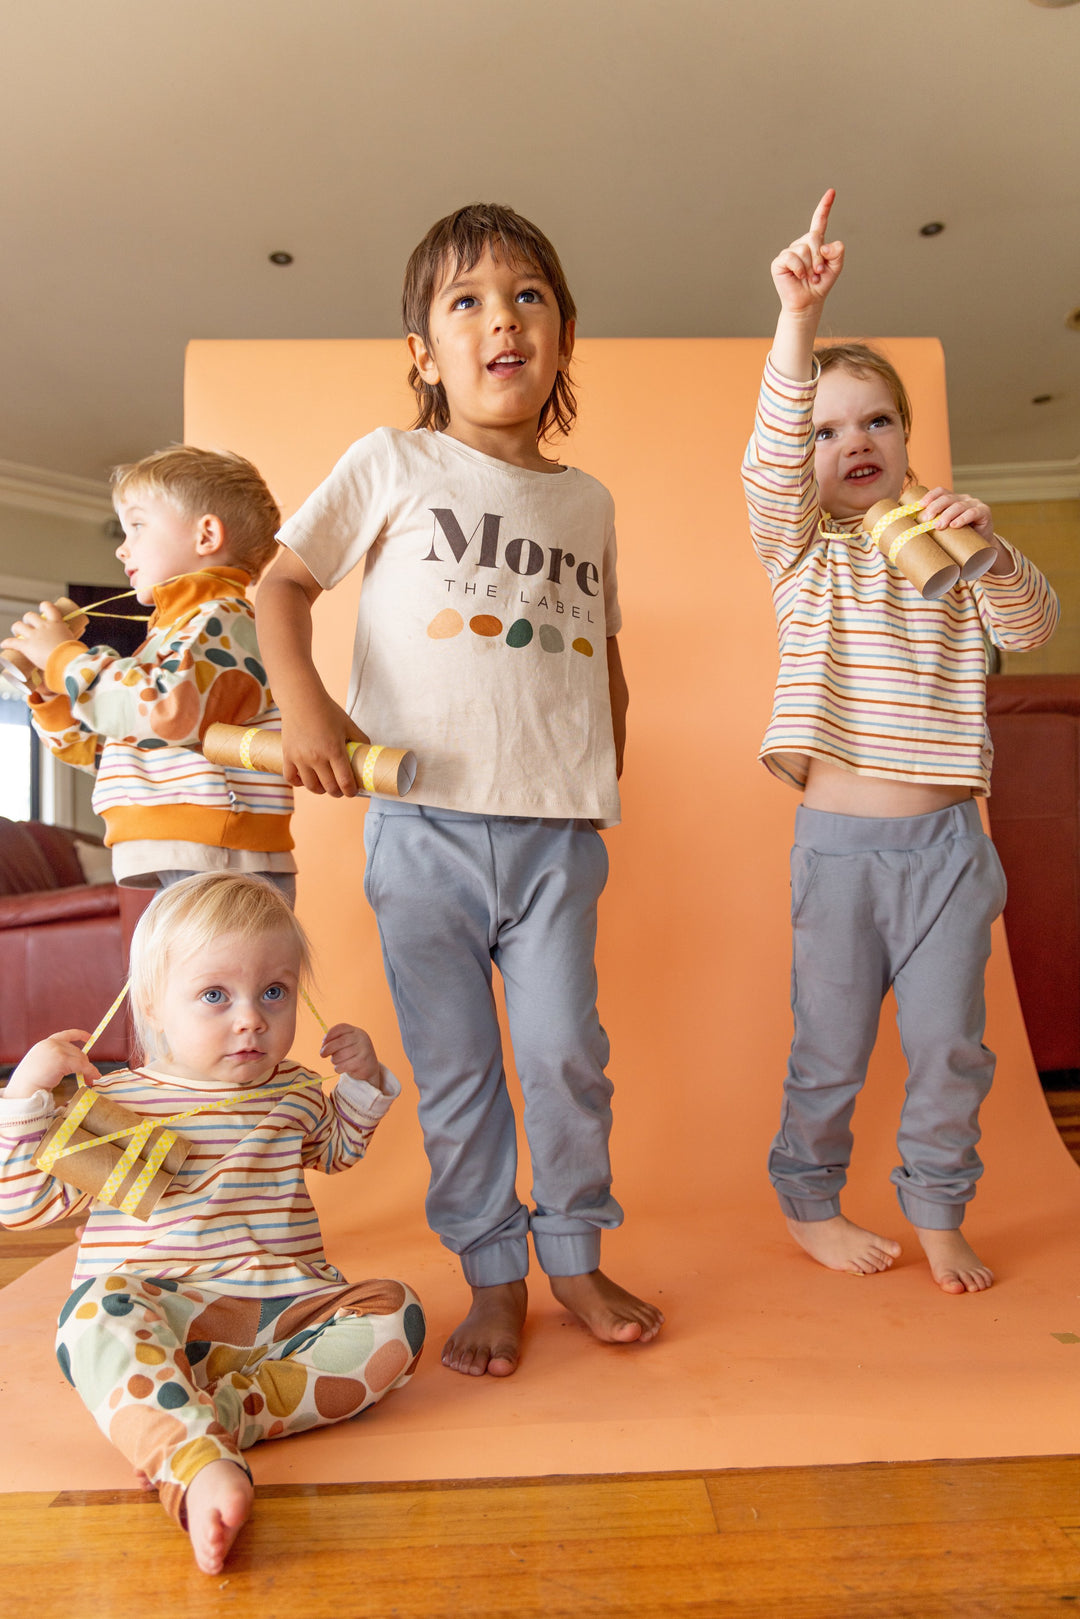 Four children standing on photography set with homemade binoculars. First child wears More the label stone print pullover, logo tee and dusty blue track pant. Second child wears dusty blue track pant and logo tee. Third child wears dusty blue track pant and striped long sleeve tee and fourth child wears stone print leggings and striped long sleeve tee.  